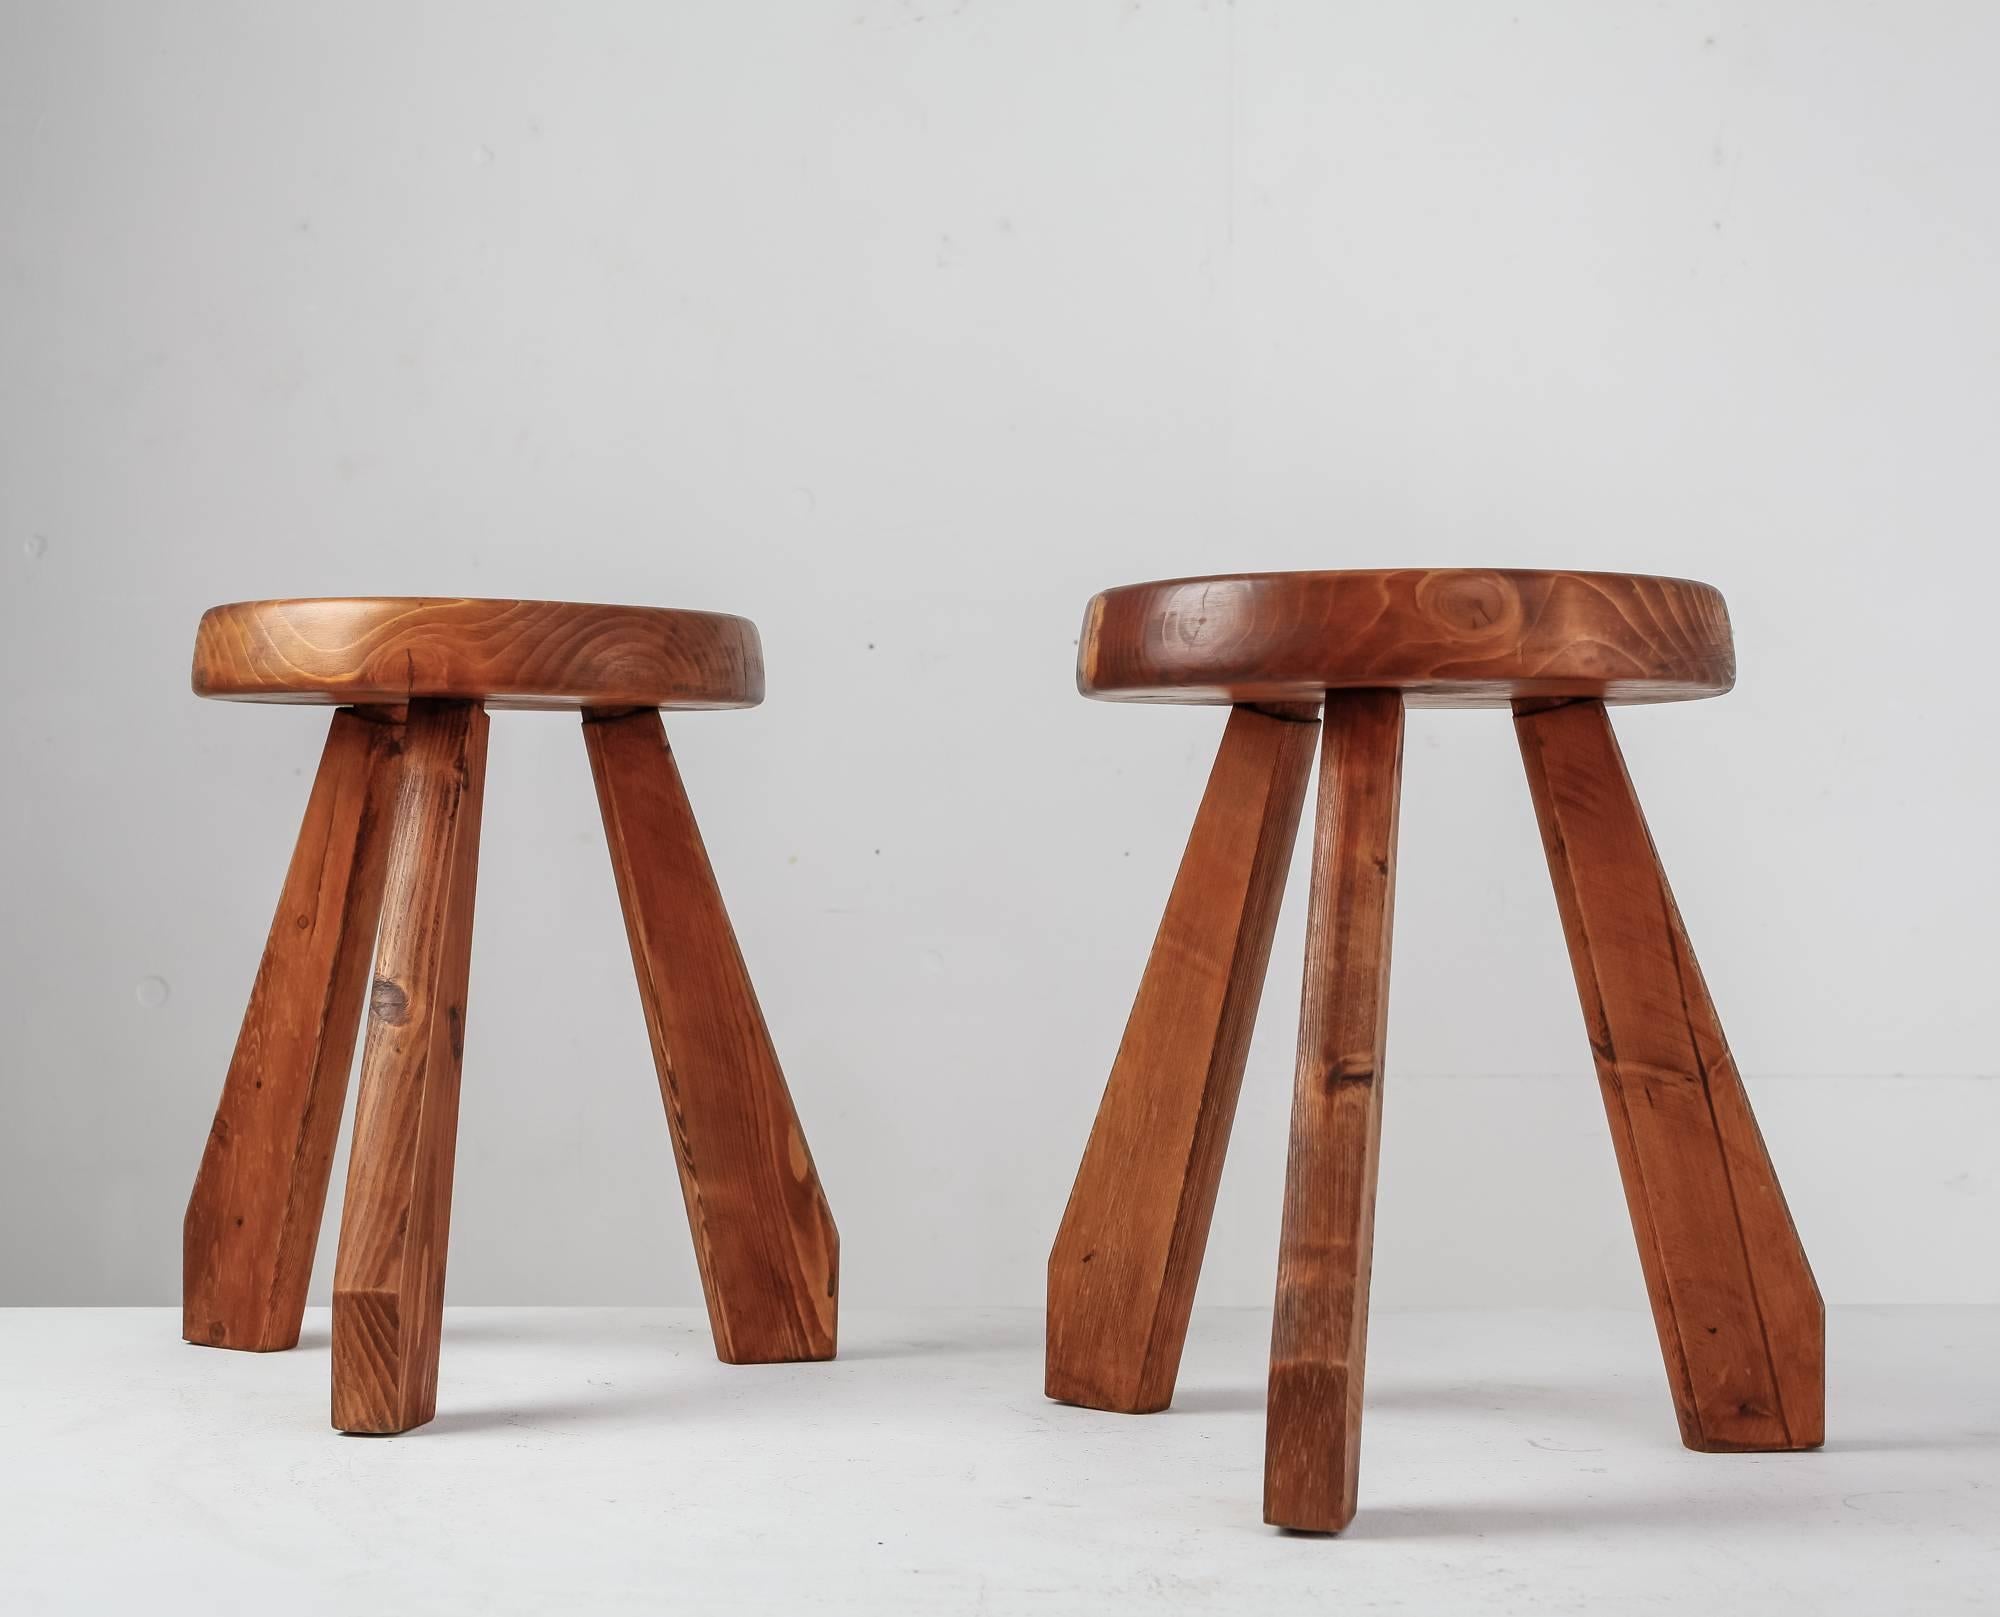 A pair of Charlotte Perriand Sandoz stools with a round and thick seating with a 32 cm diameter. The wood has an amazing patina.

This 'Sandoz' type, with their typical feet, was originally designed circa 1955 and was used in Perriand’s own chalet